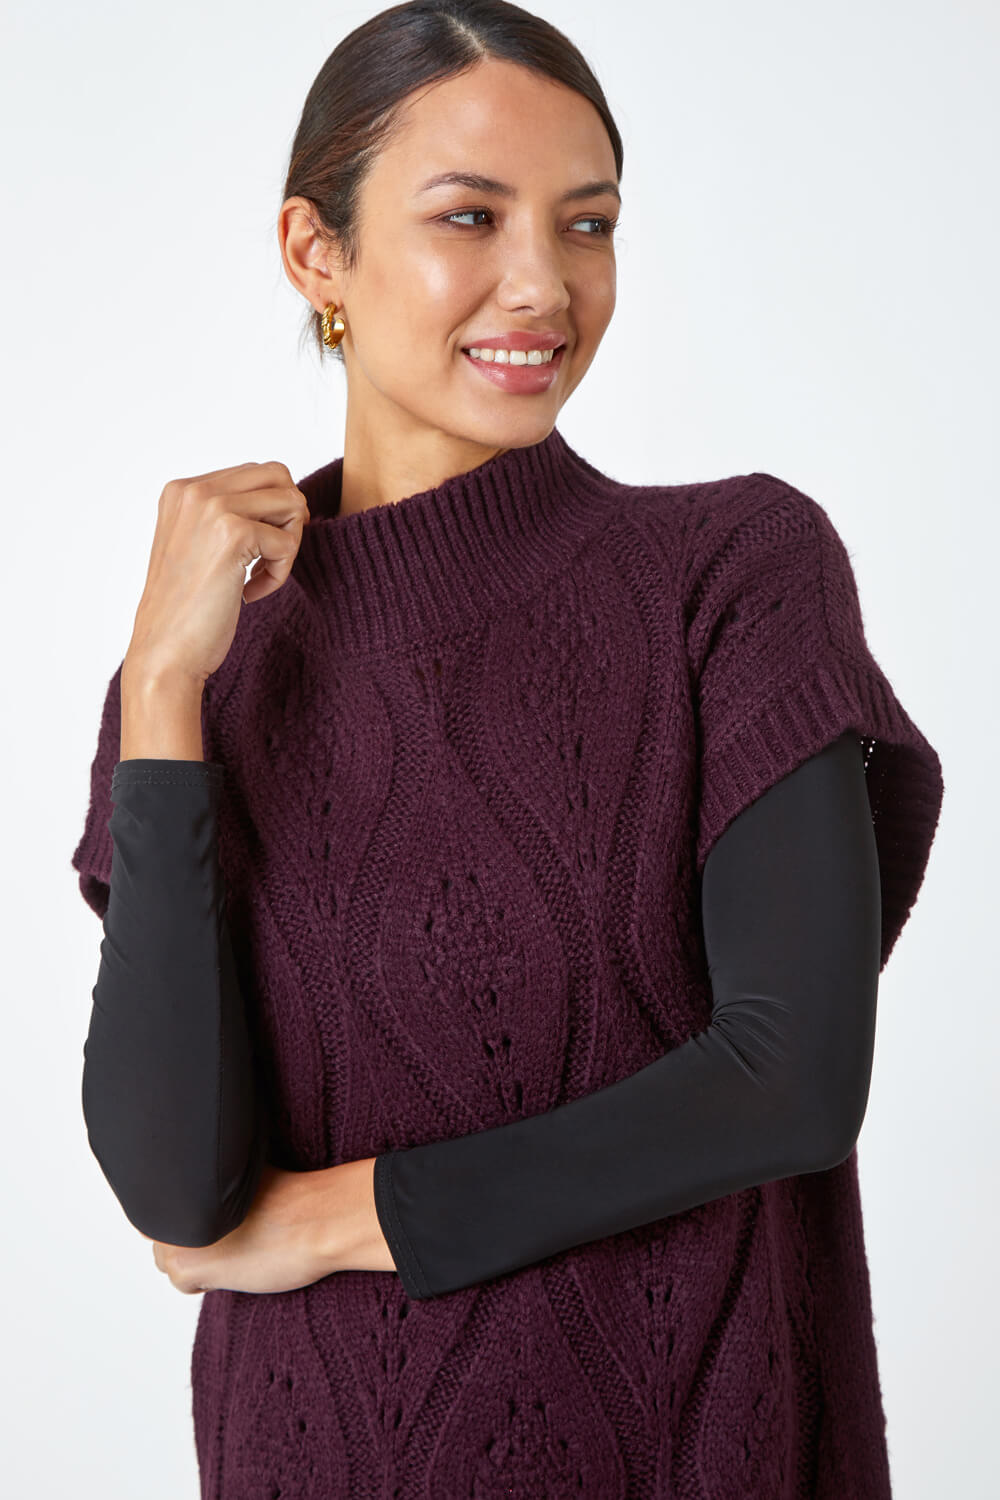 Aubergine High Neck Pointelle Knitted Vest, Image 4 of 5